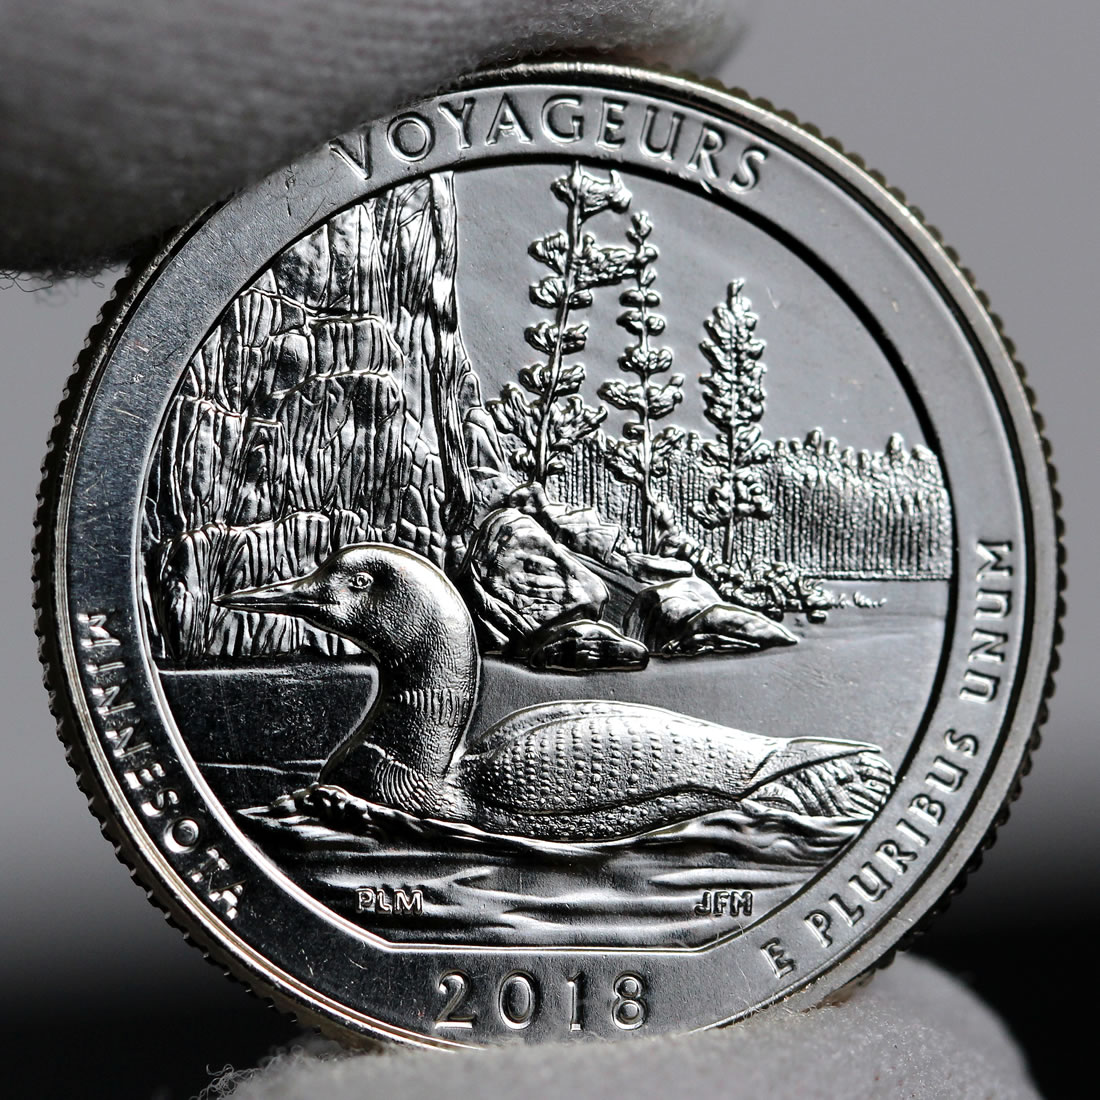 Williams and Clark Voyageurs National Park Coin Lapel Pin Uncirculated U.S Quarter 2018 Tie Pin 